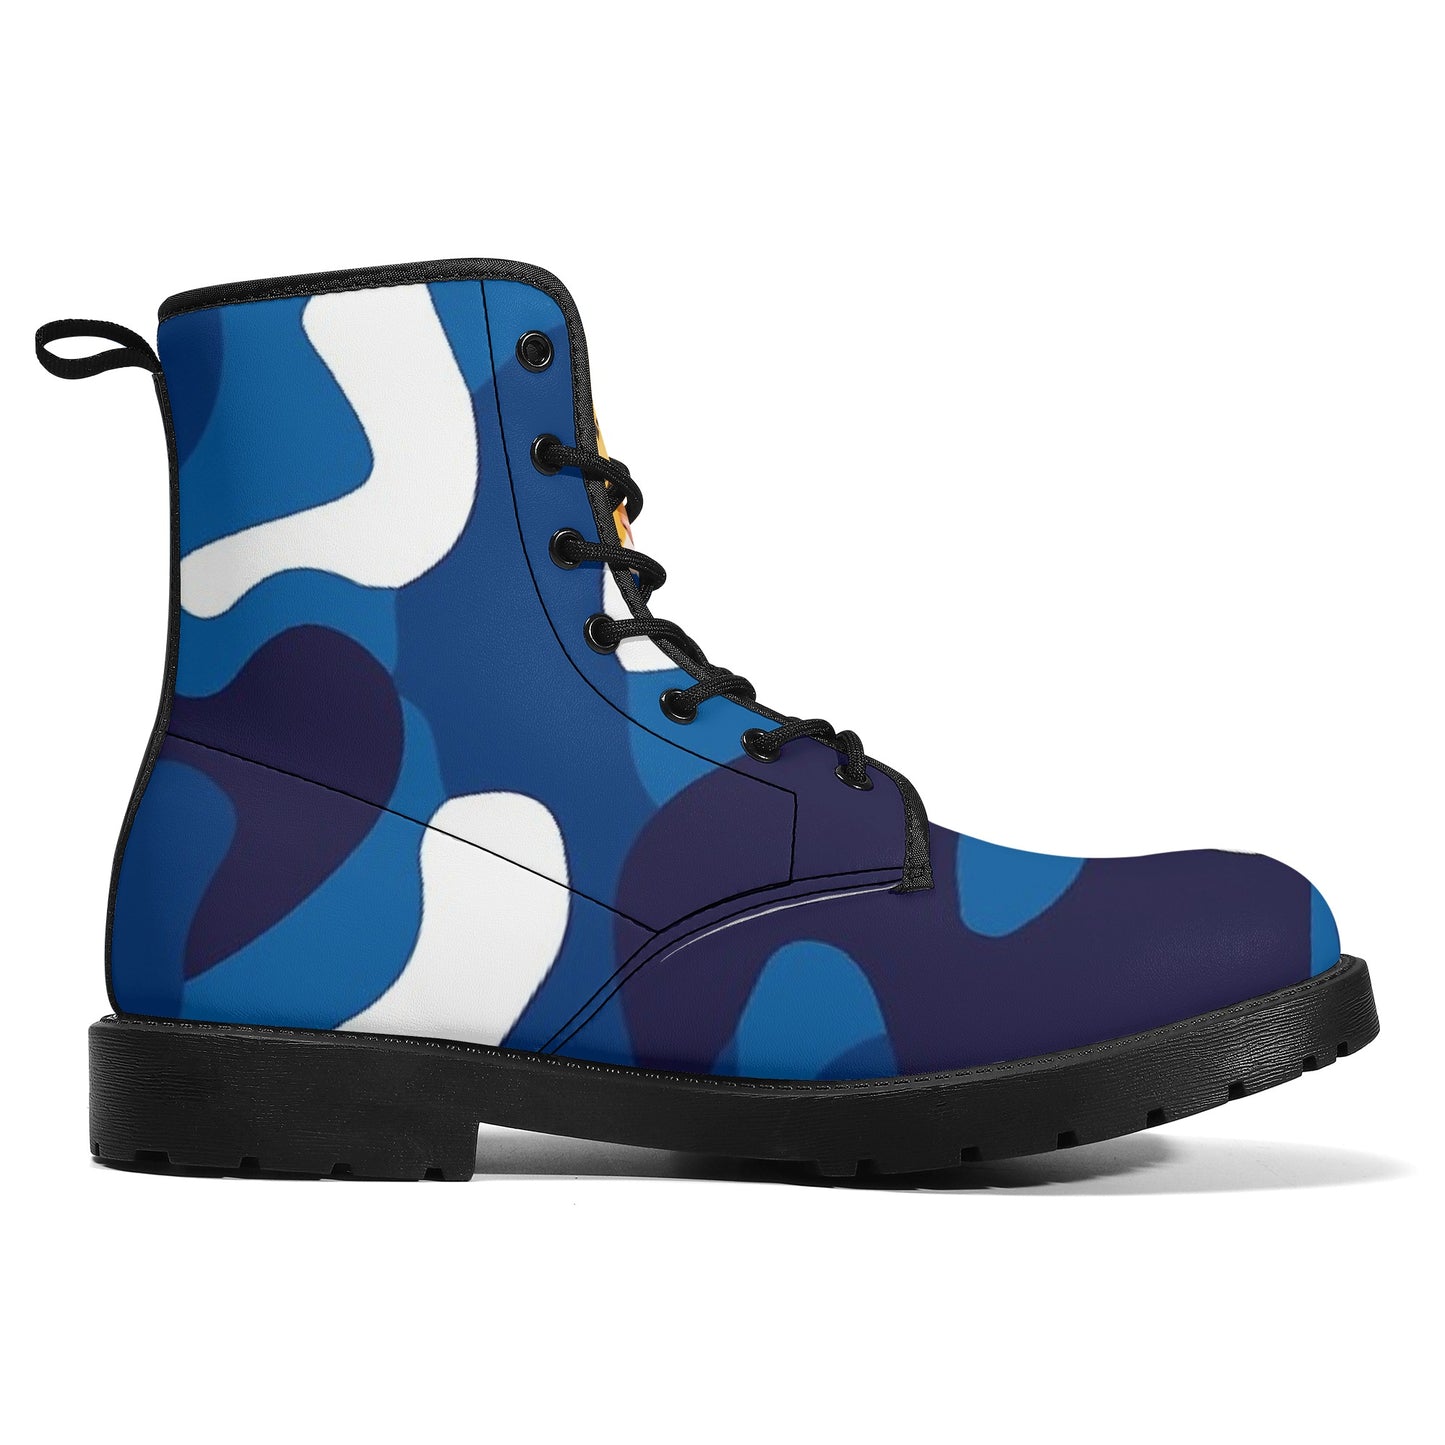 Stand out  with the  Nugget Army Police Mens Leather Boots  available at Hey Nugget. Grab yours today!